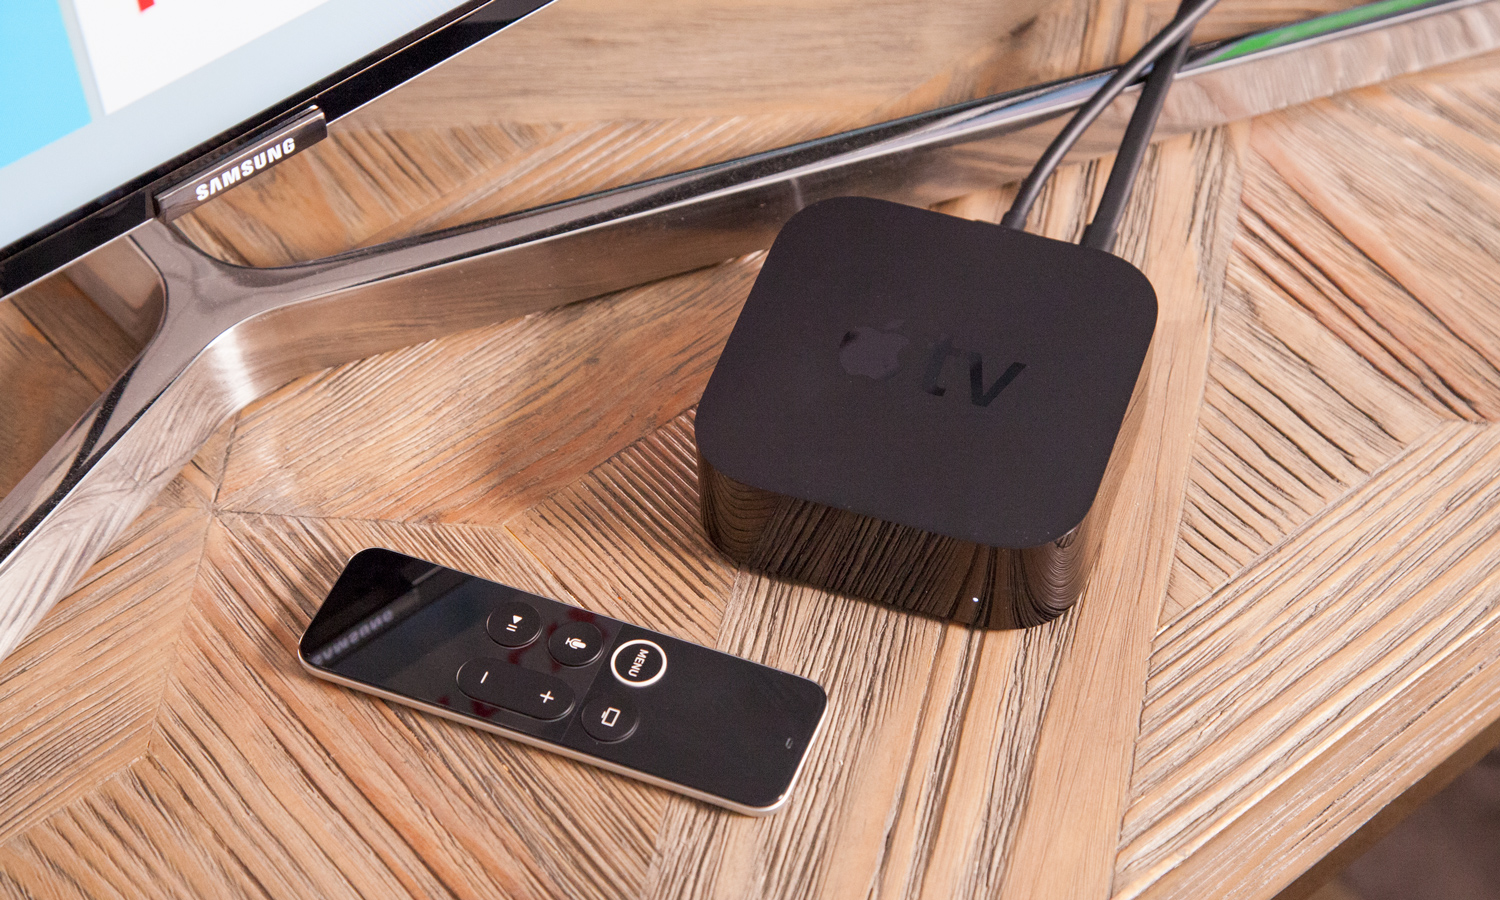 Apple TV 4K One Powerful (But Pricey) Streaming Box | Tom's